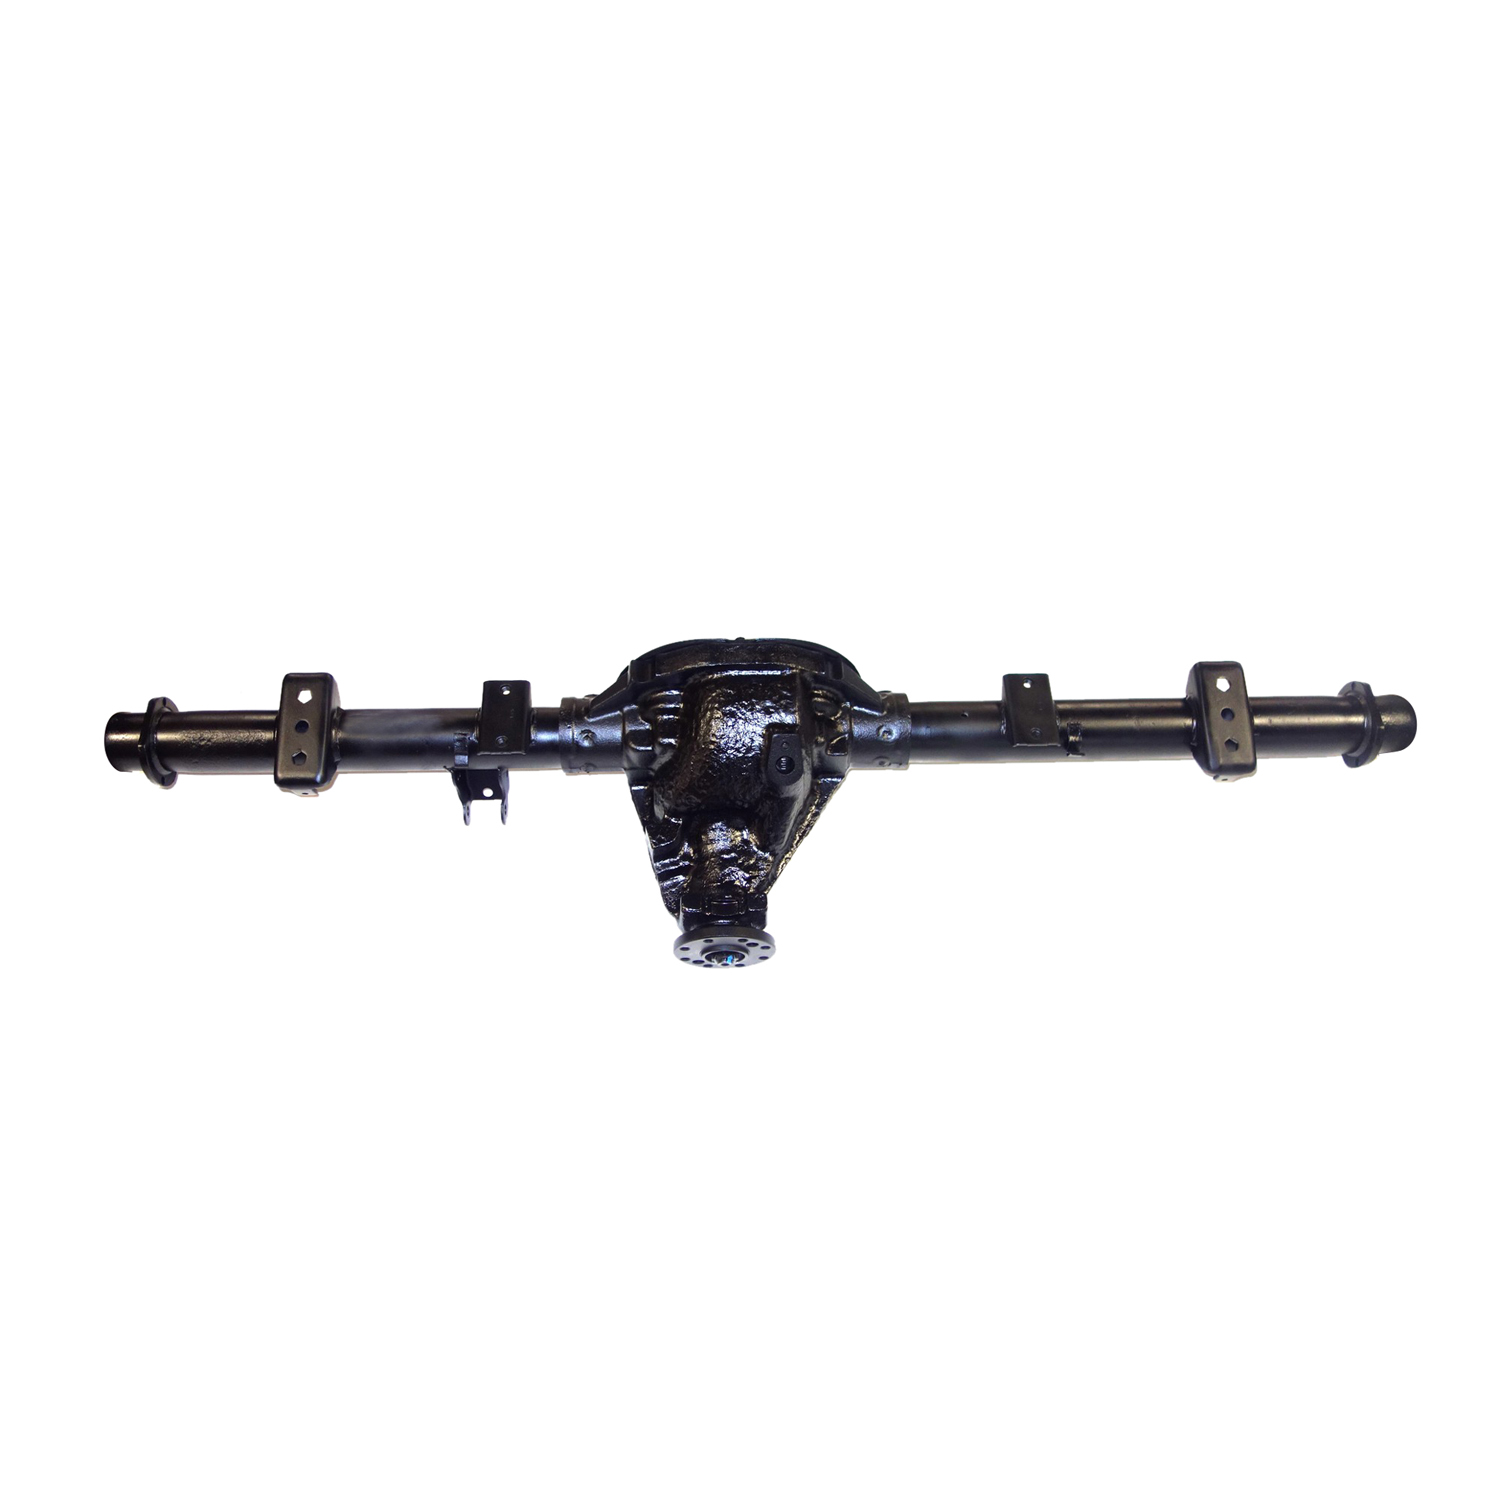 Remanufactured Complete Axle Assembly for Chy 8.25" 03-04 Dakota 3.92 , 4x4, Posi LSD